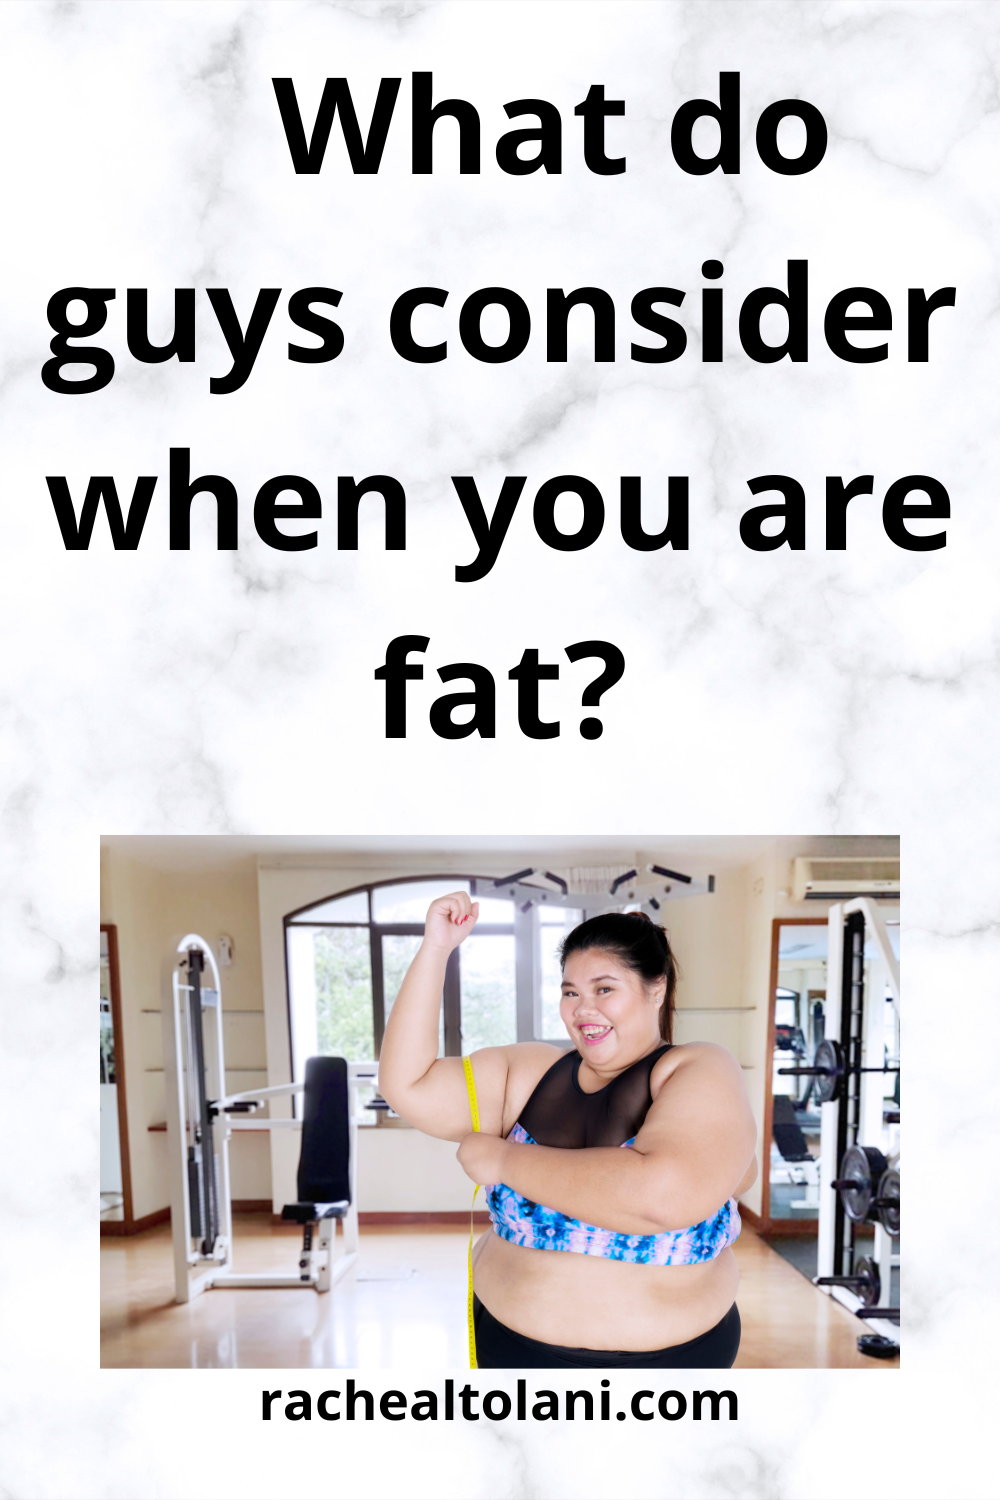 What do guys consider when you are fat?